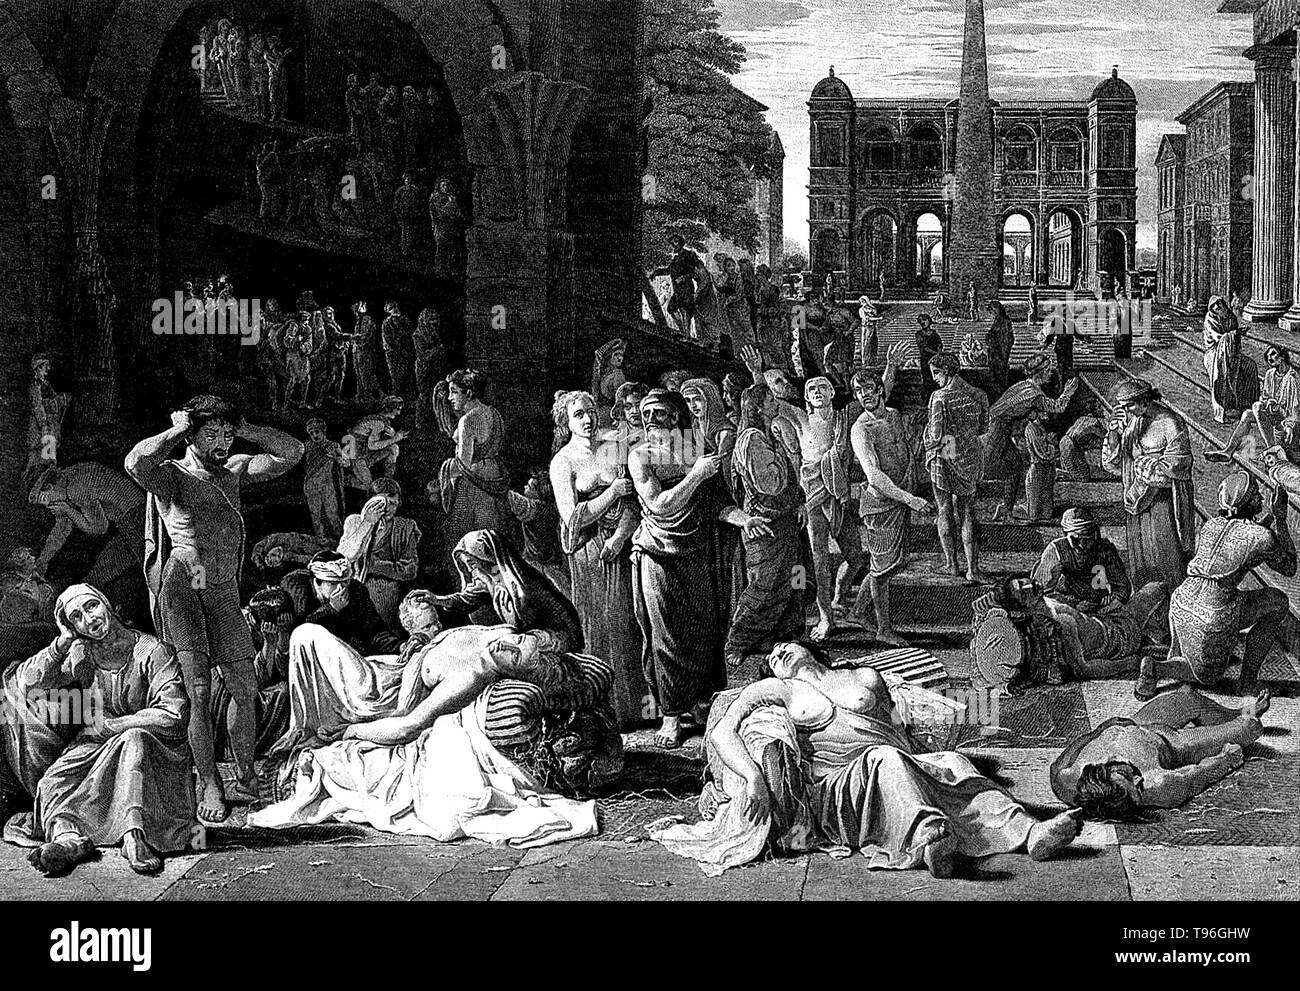 The Plague of Athens was an epidemic that devastated the city-state of Athens in ancient Greece during the second year of the Peloponnesian War (430 BC) when an Athenian victory still seemed within reach. It is believed to have entered Athens through Piraeus, the city's port and sole source of food and supplies. Thucydides states that people ceased fearing the law since they felt they were already living under a death sentence. Likewise, people started spending money indiscriminately. Stock Photo